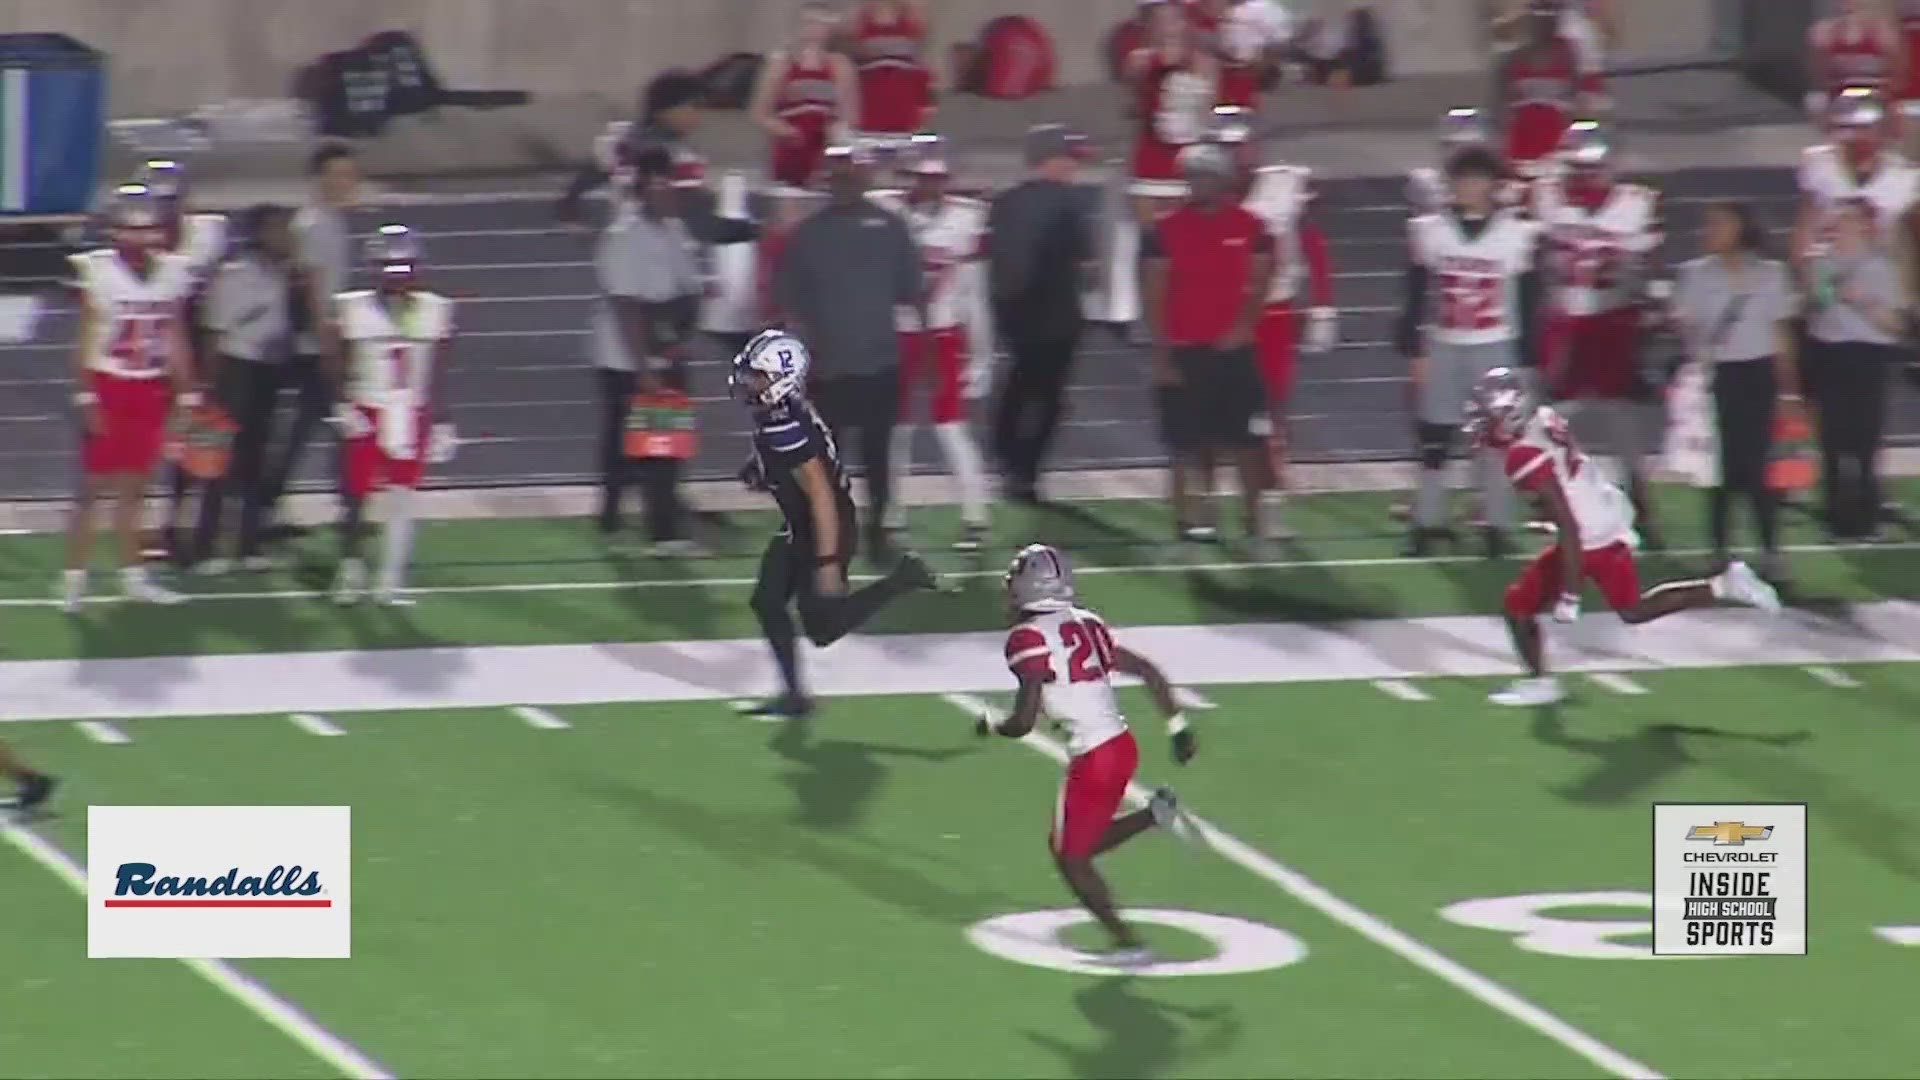 KHOU 11's Matt Musil has scores, highlights and stories from around the Houston area.